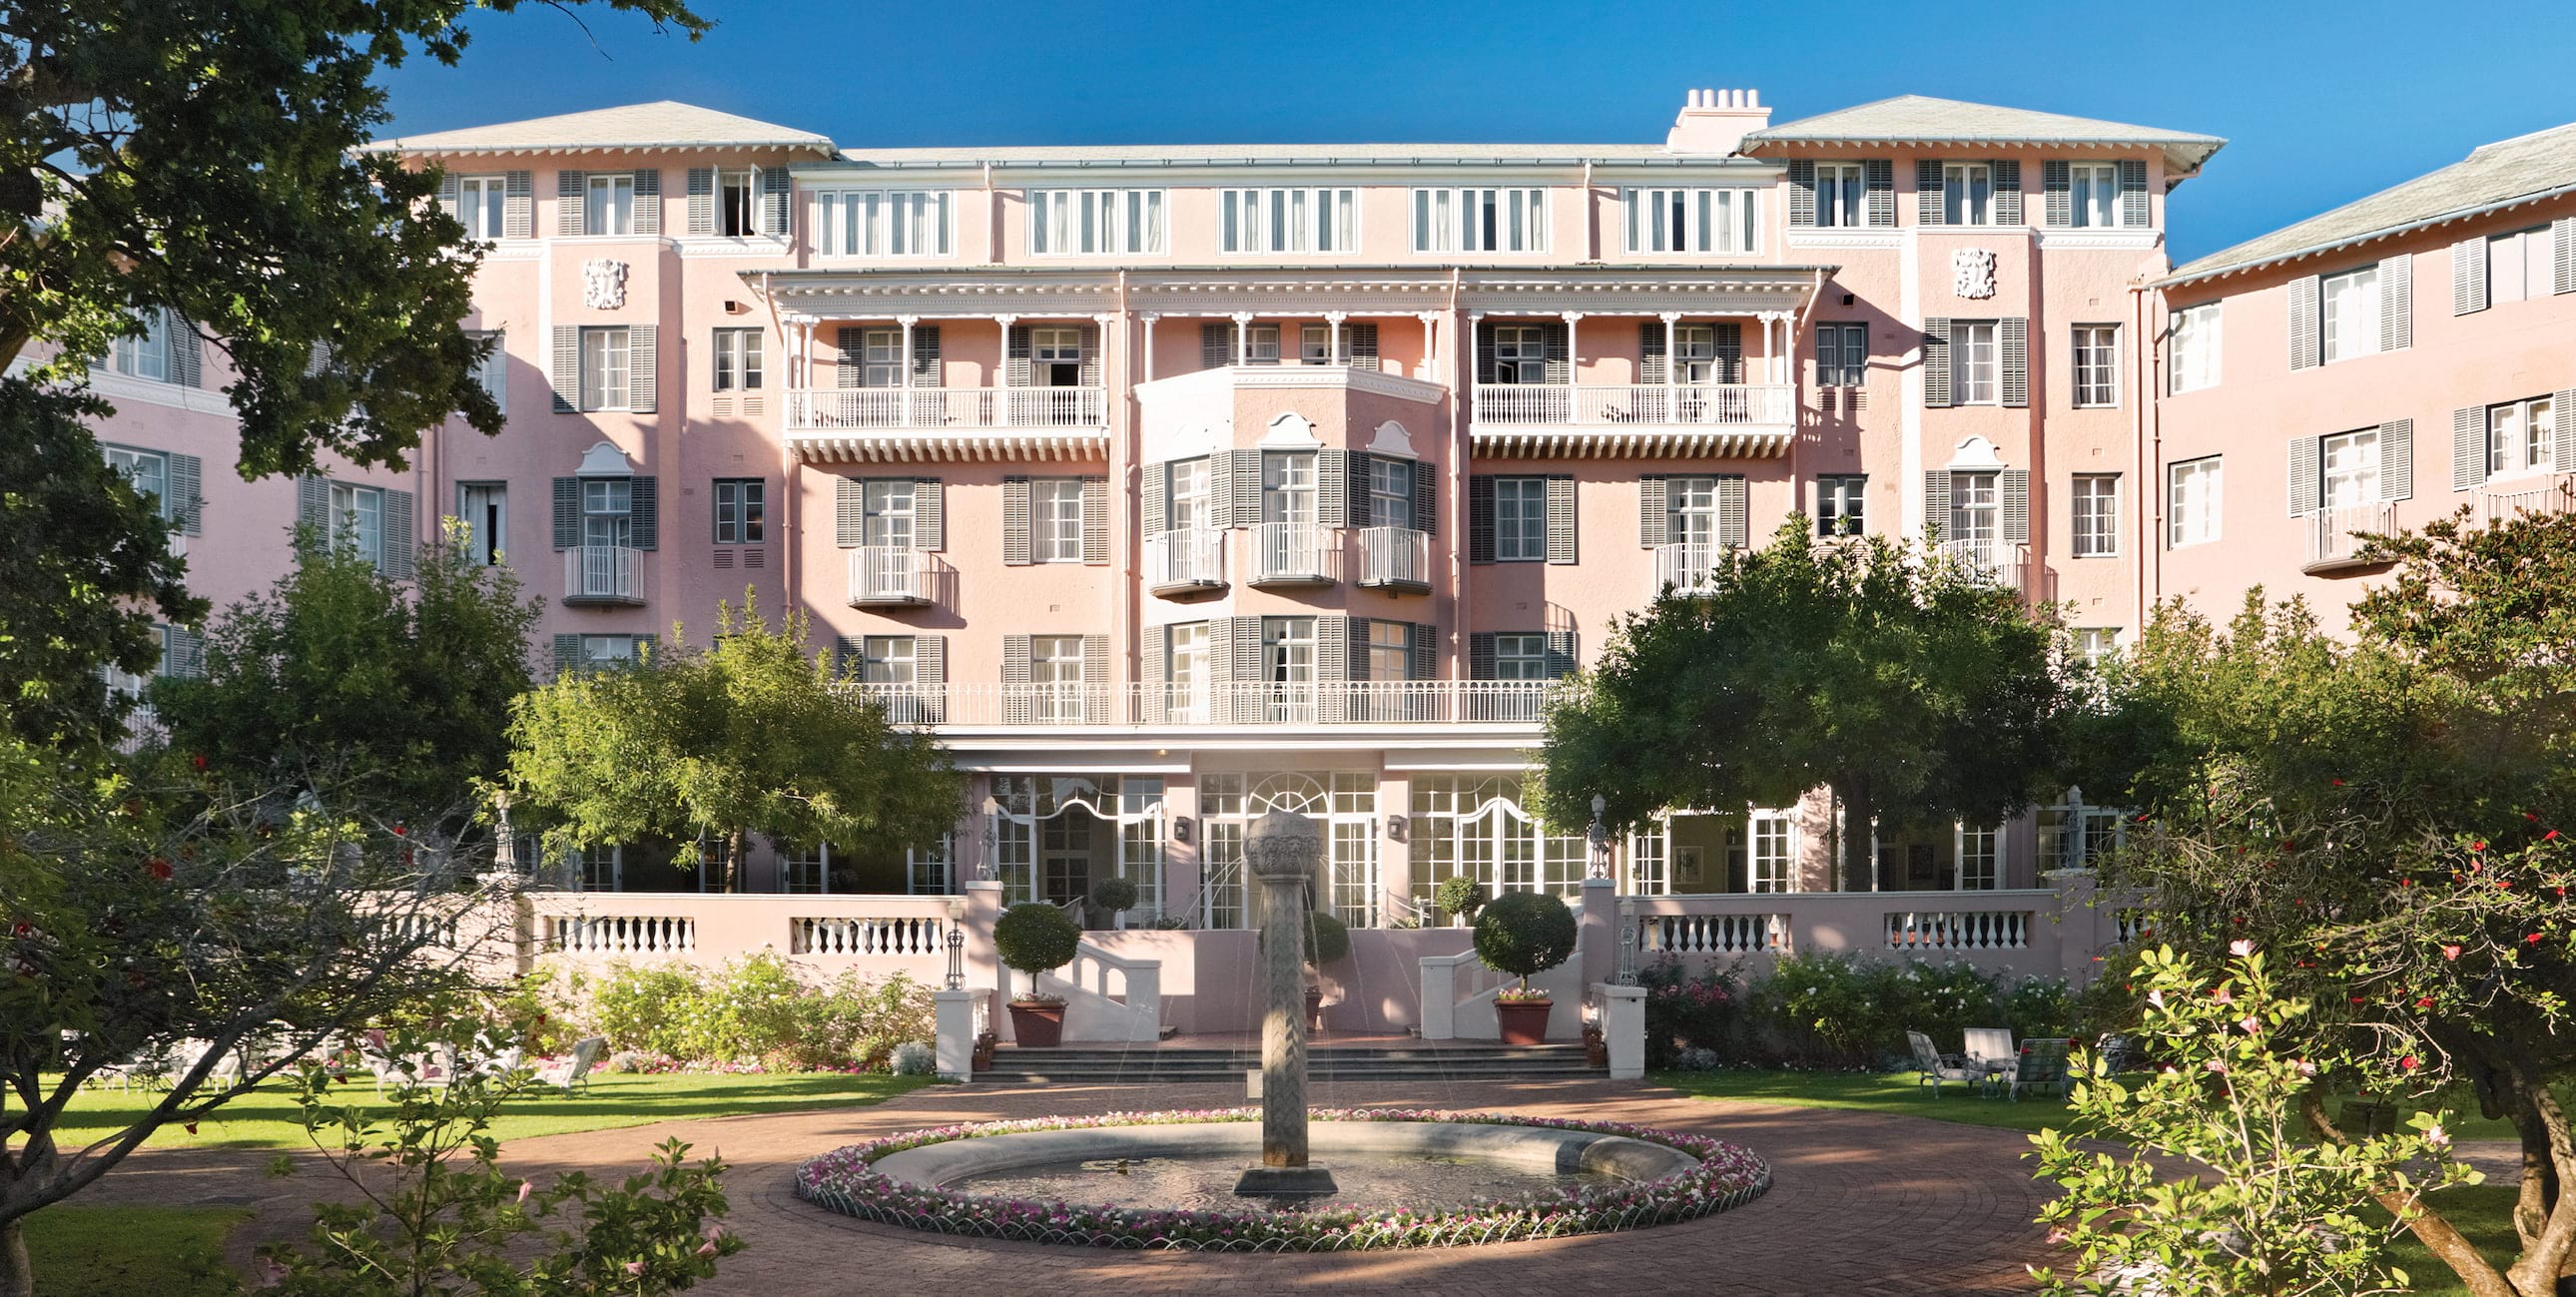 Belmond Mount Nelson Hotel History | 100 Years of Pink